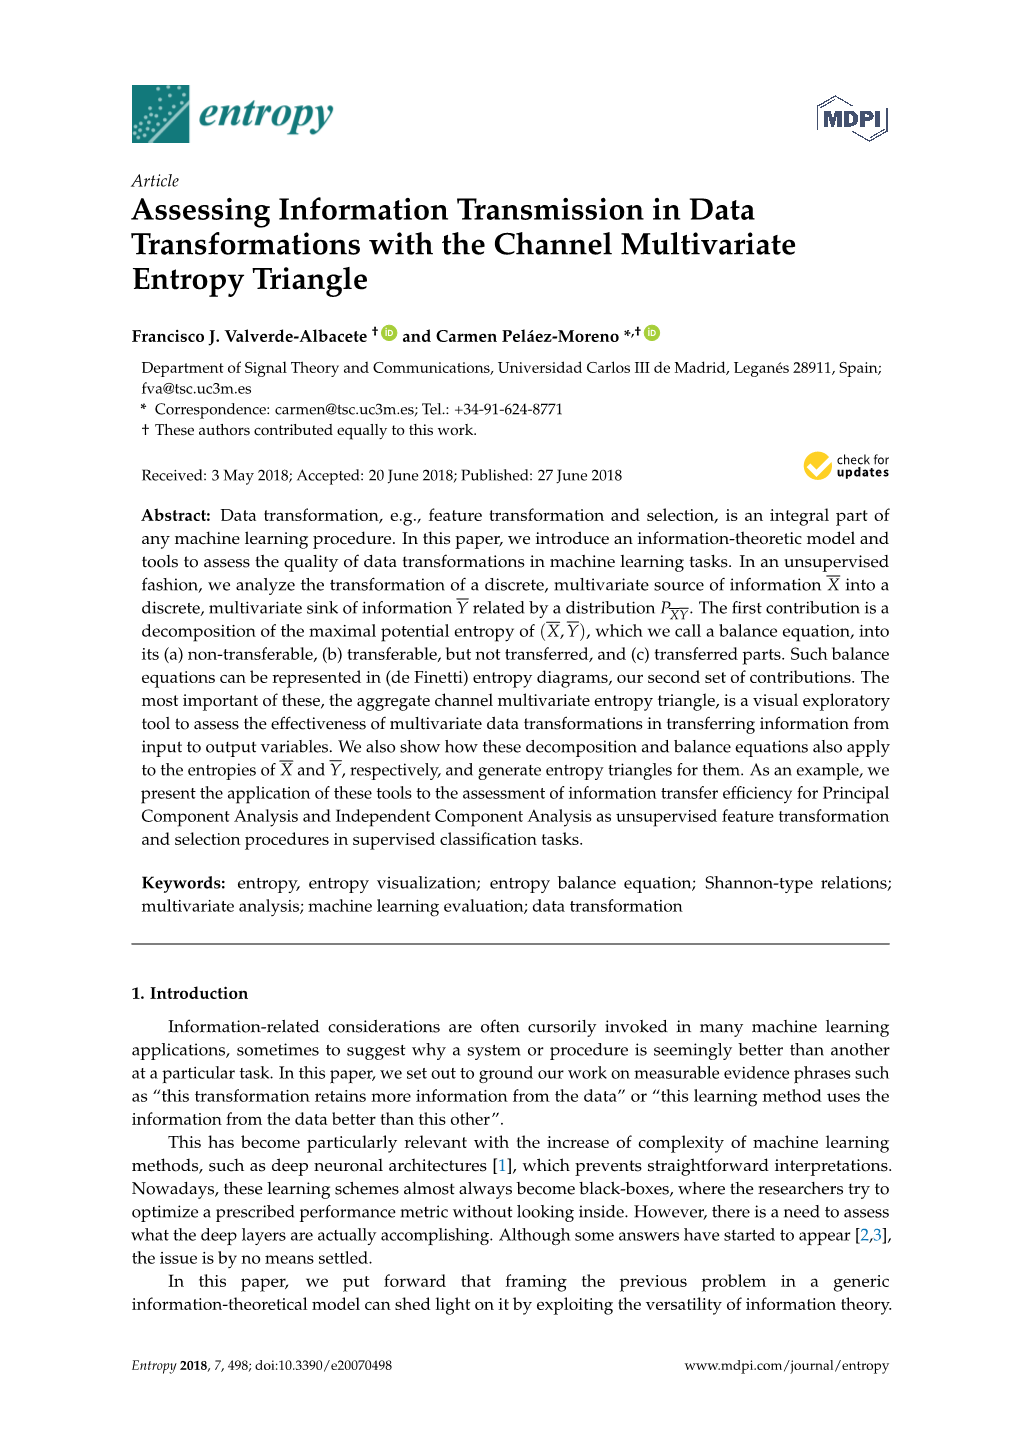 Assessing Information Transmission in Data Transformations with the Channel Multivariate Entropy Triangle